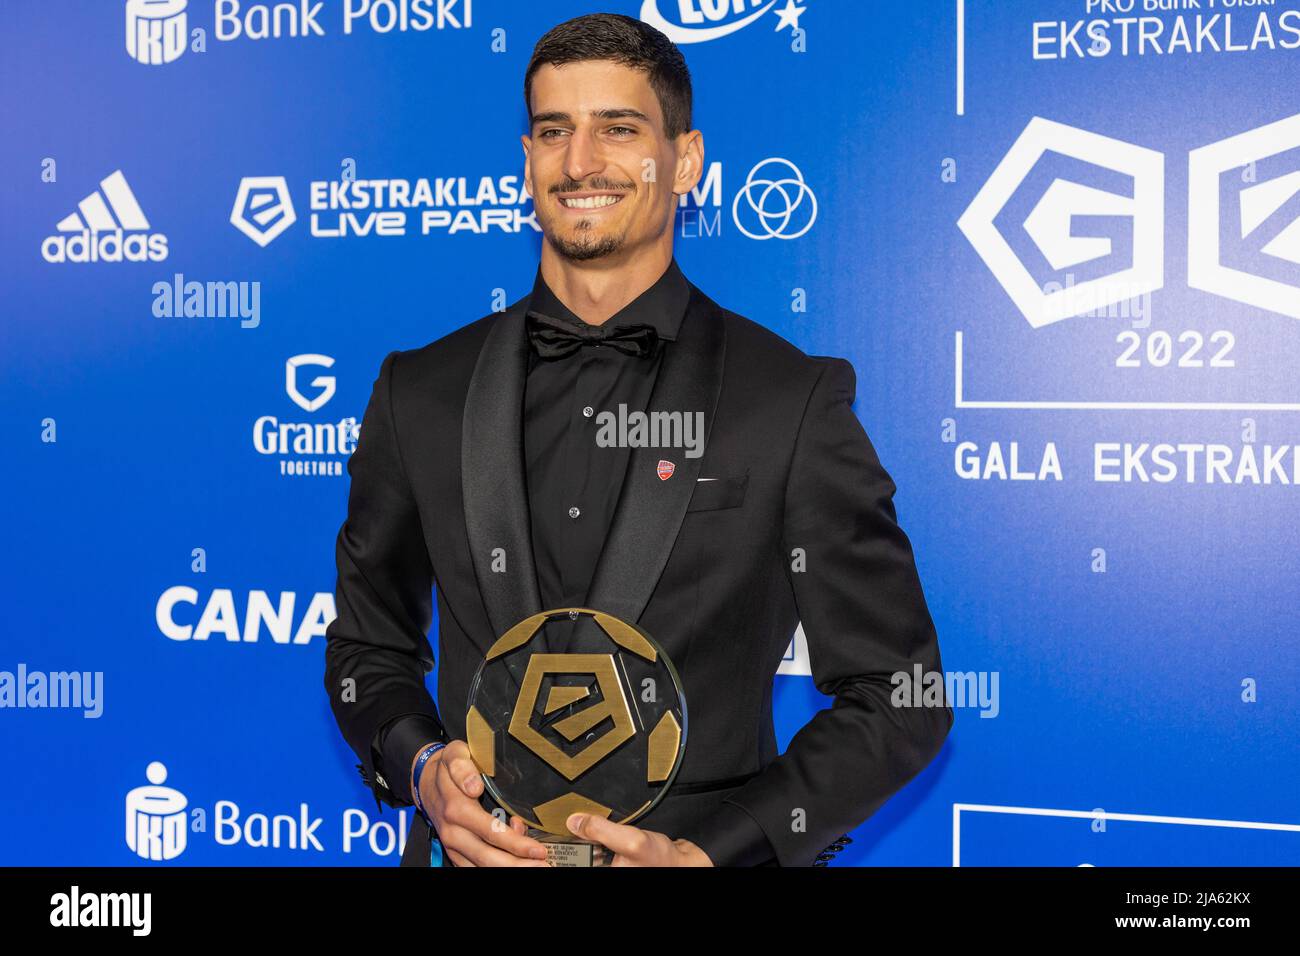 Warsaw, Poland. 23rd May, 2022. Vladan Kovacevic of Rakow Czestochowa with award for the best goalkeeper of the season 2021/22 seen during Gala of Ekstraklasa 2022 in Warsaw. Credit: SOPA Images Limited/Alamy Live News Stock Photo